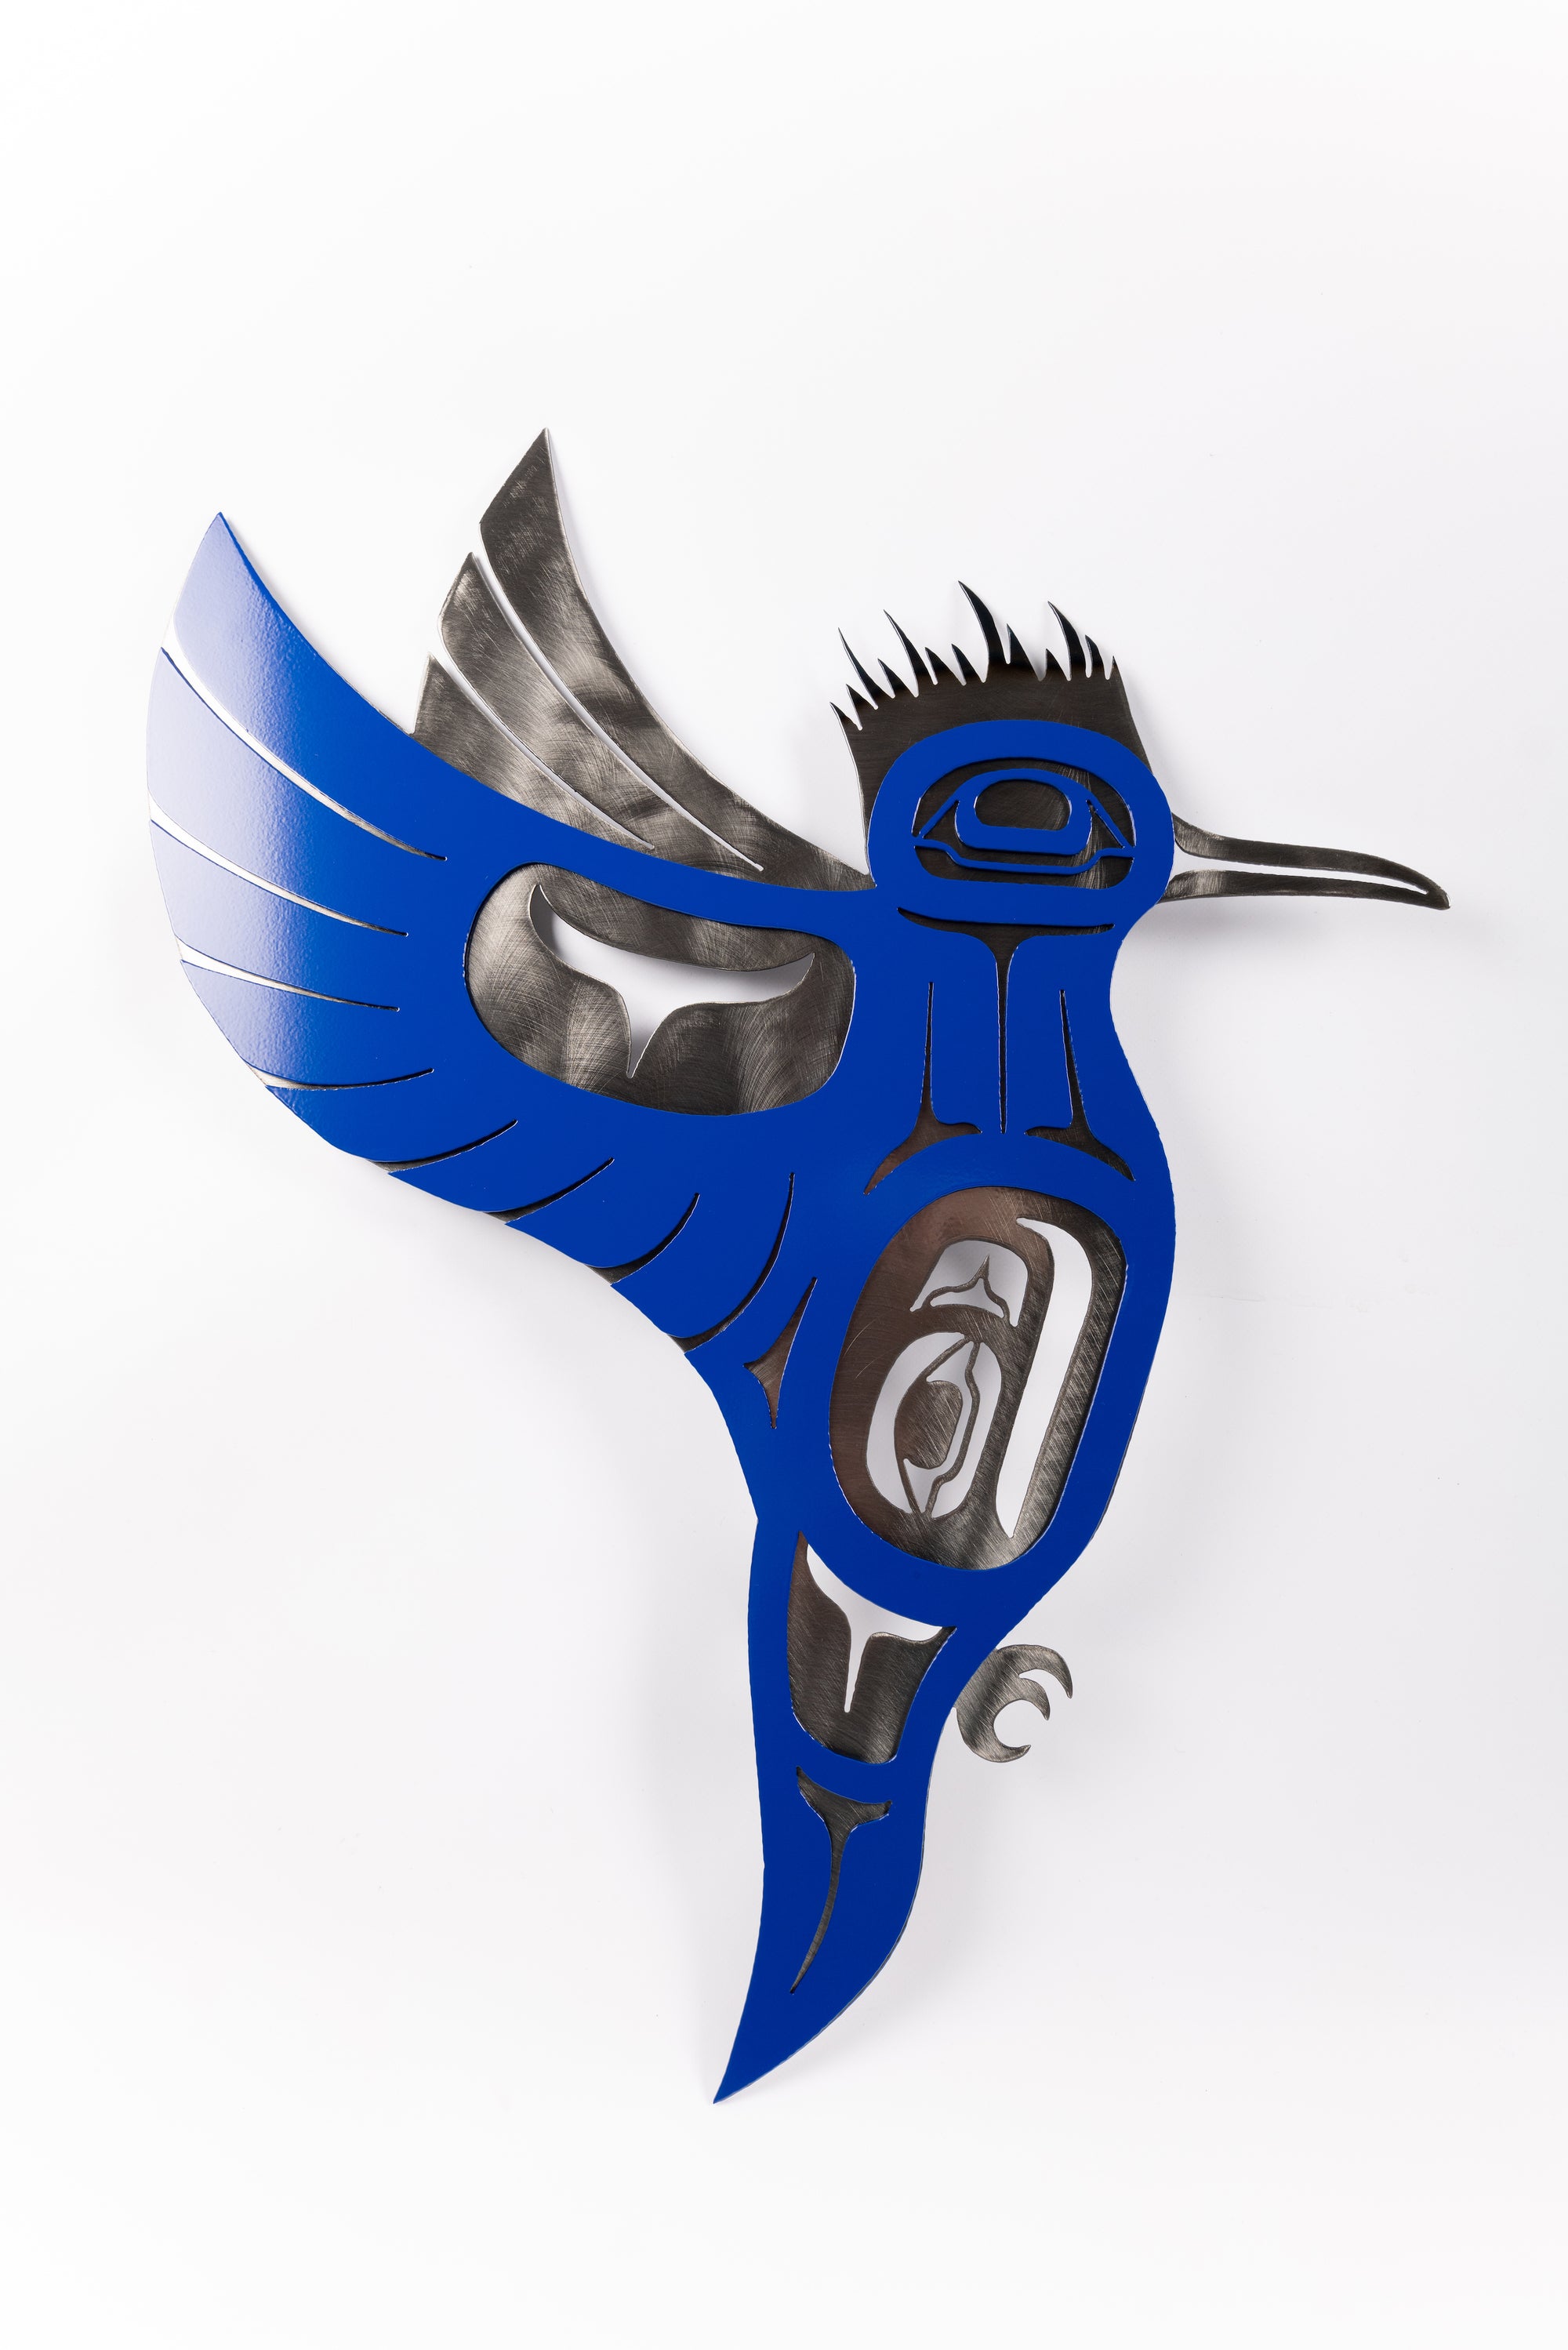 Trevor Husband  Kingfisher Silver and Blue - Trevor Husband  Kingfisher Silver and Blue -  - House of Himwitsa Native Art Gallery and Gifts